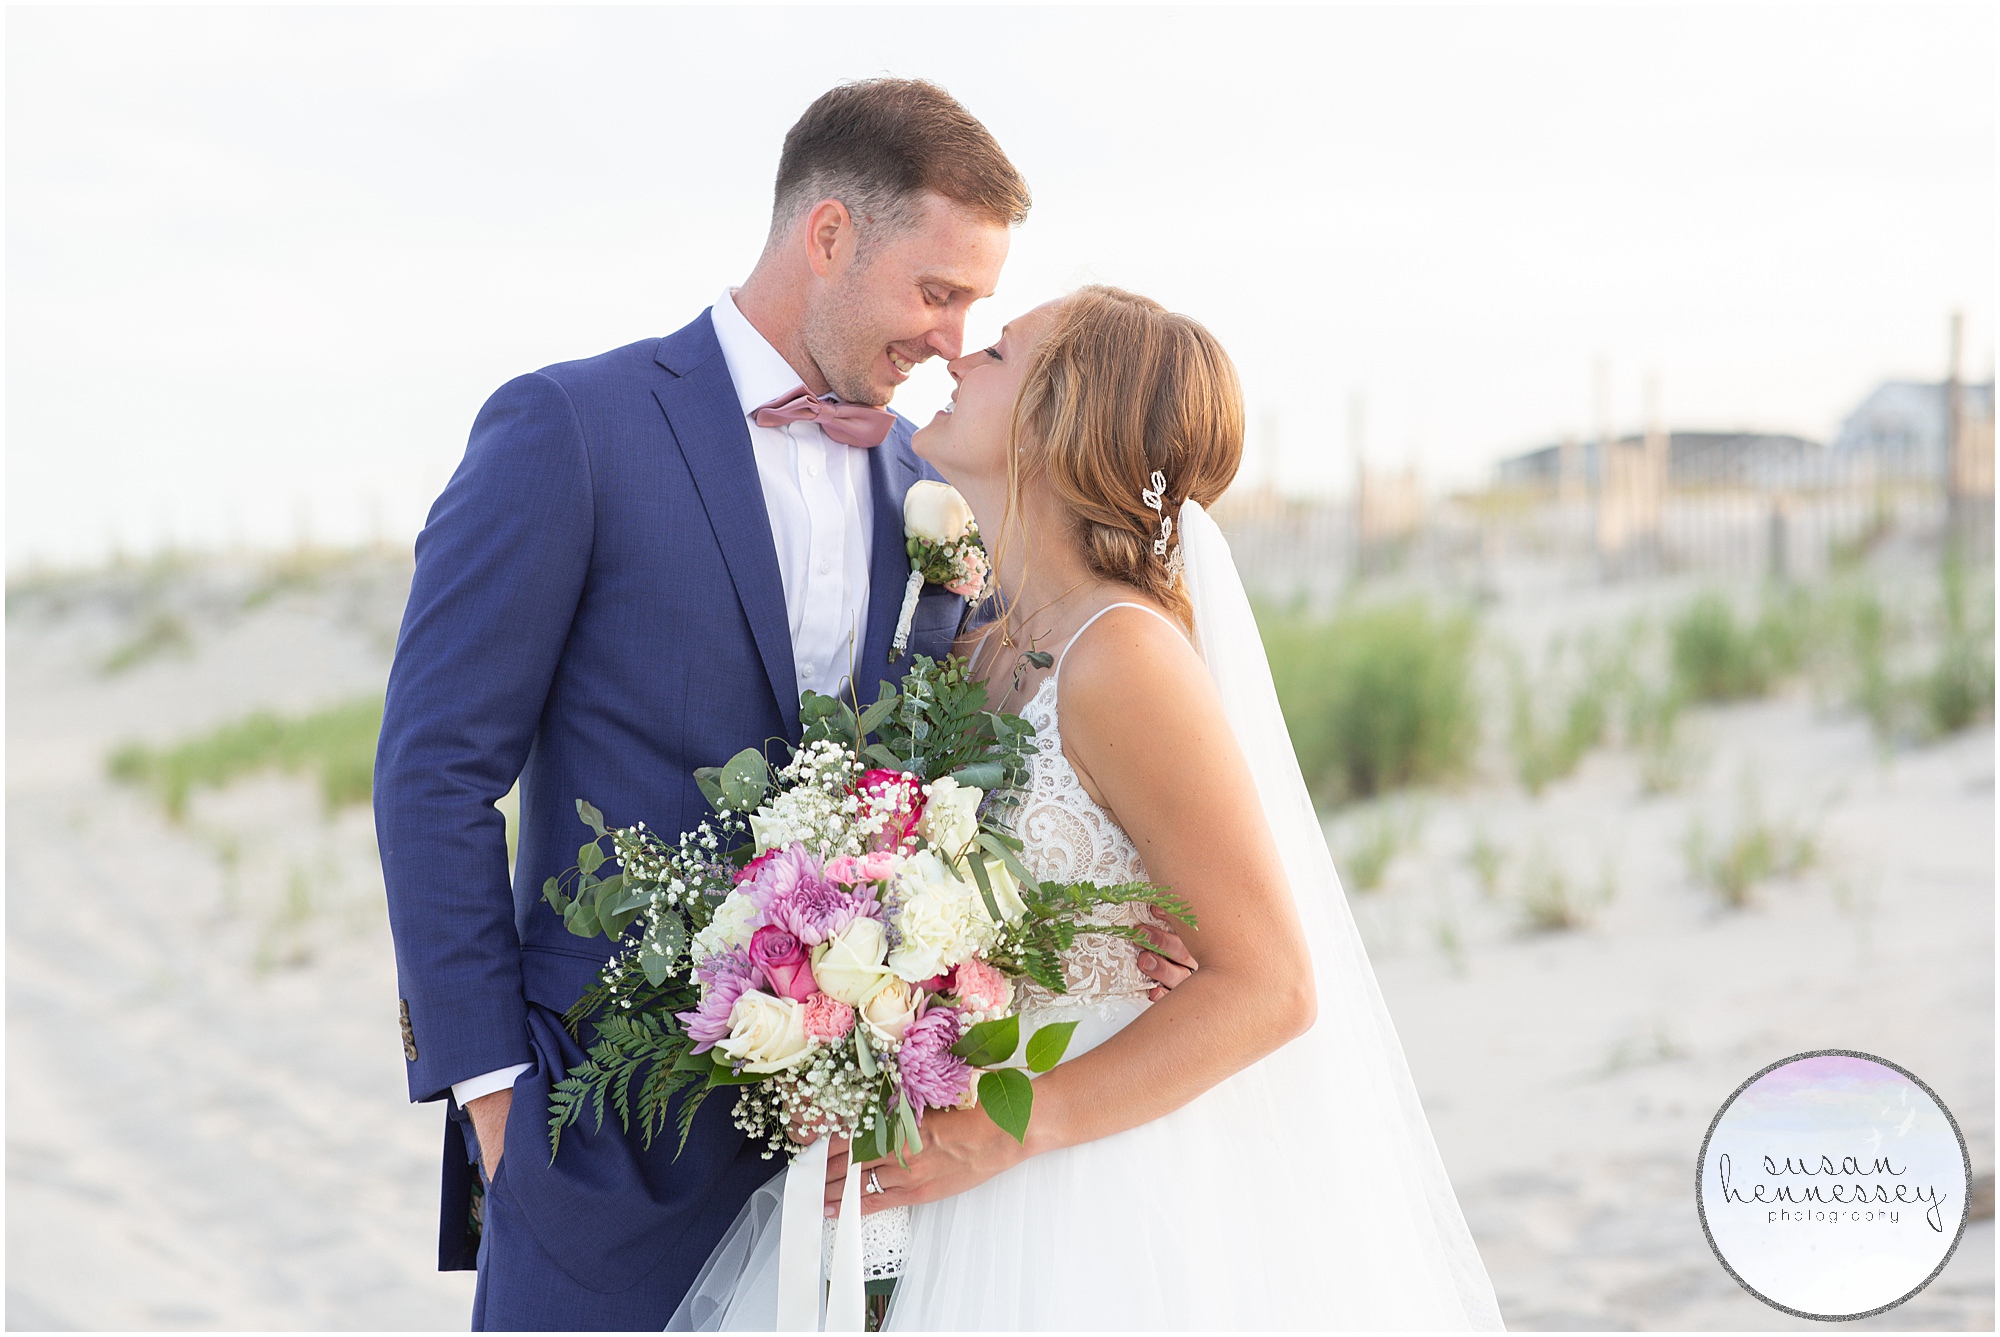 Susan Hennessey Photography Best of 2020 Weddings - LBI Microwedding bride and groom portraits